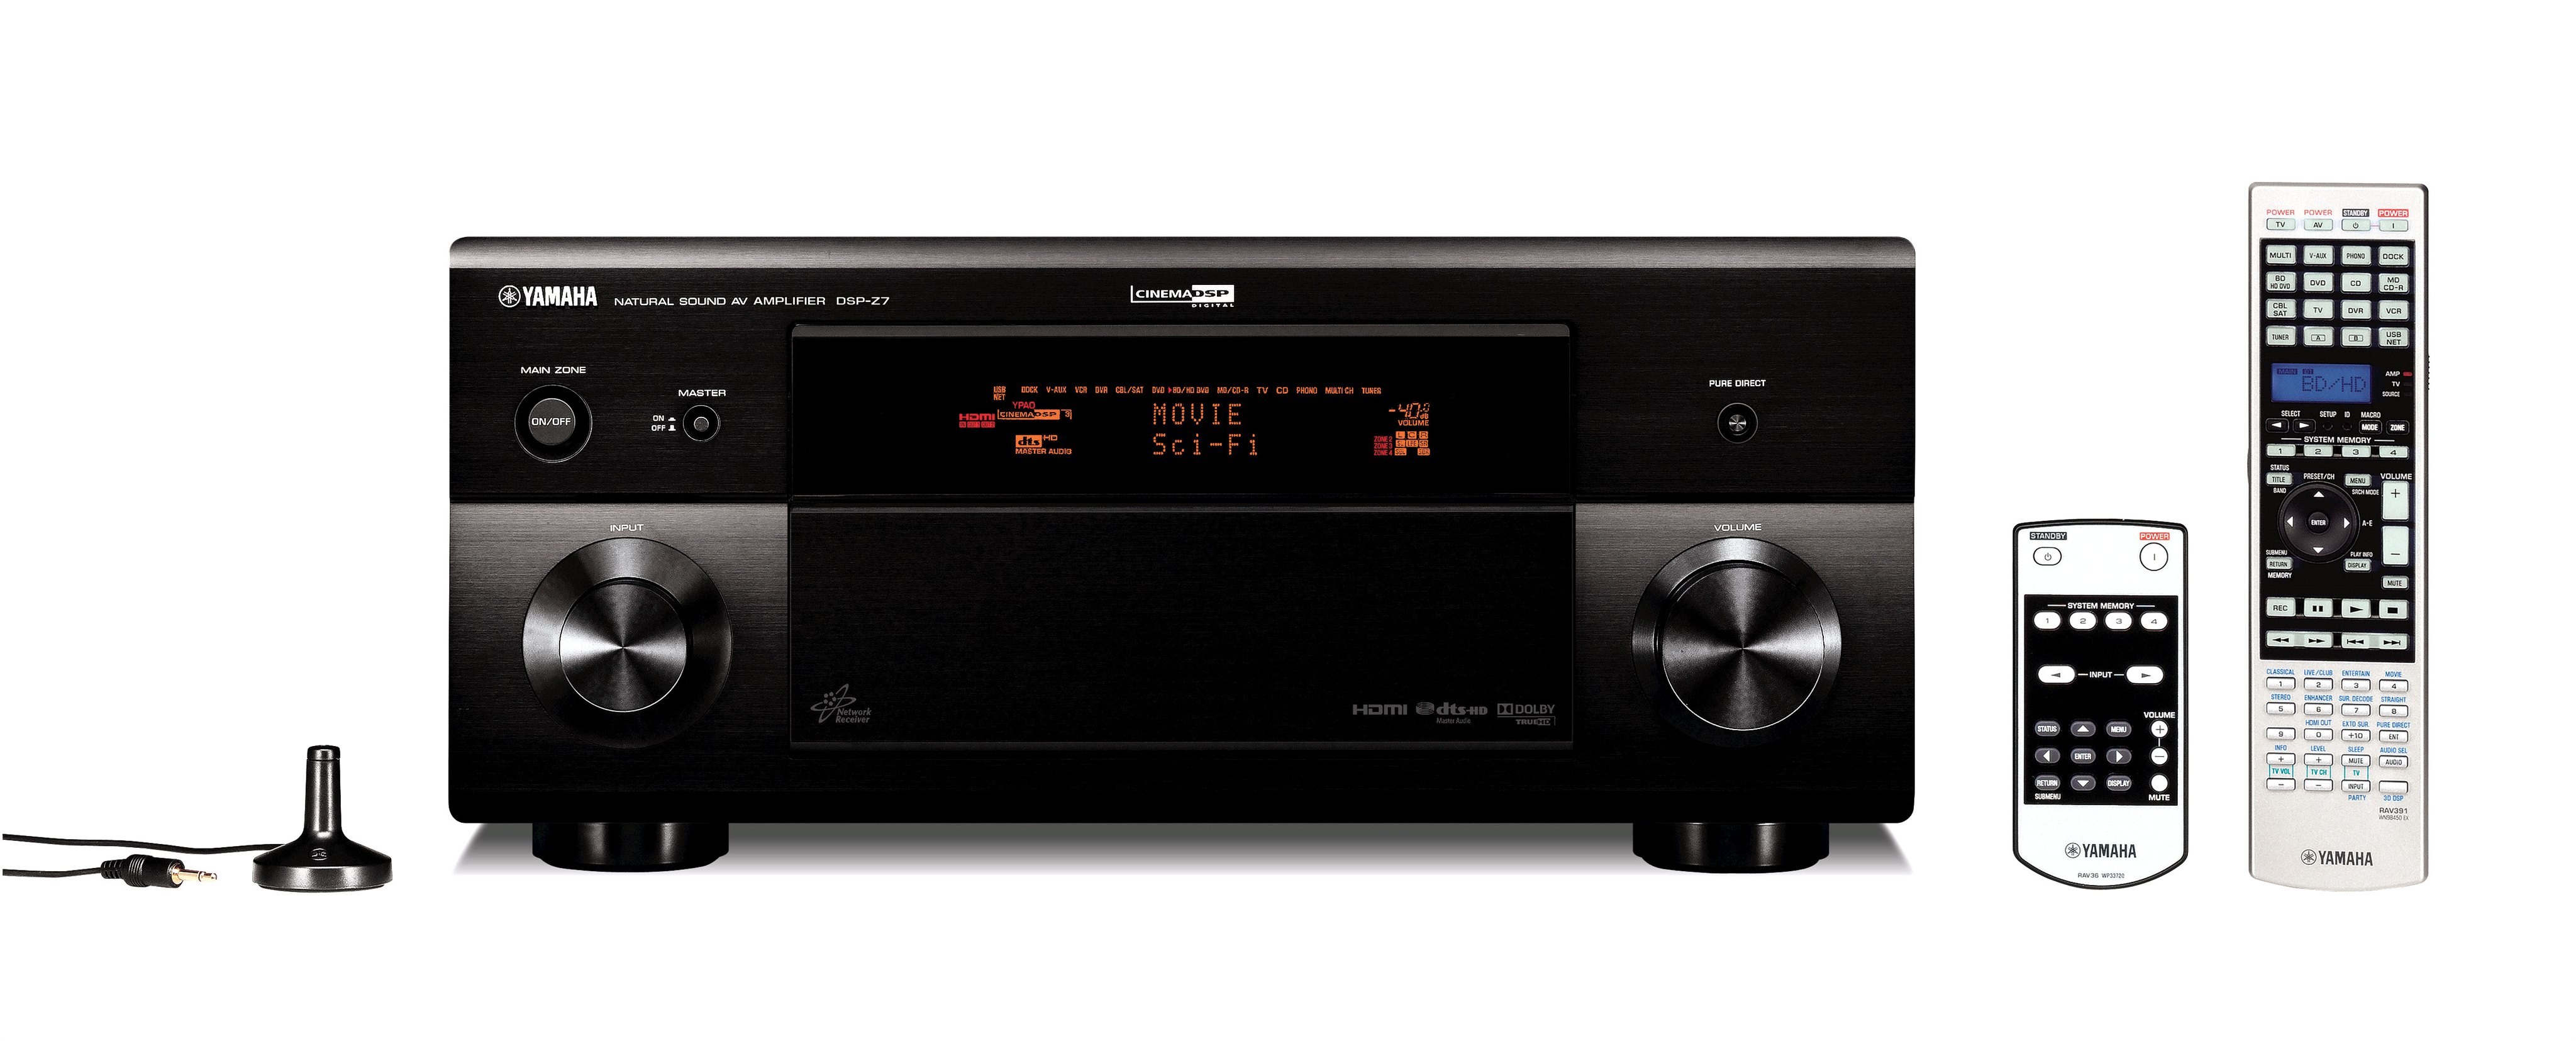 DSP-Z7 - Overview - AV Receivers - Audio & Visual - Products